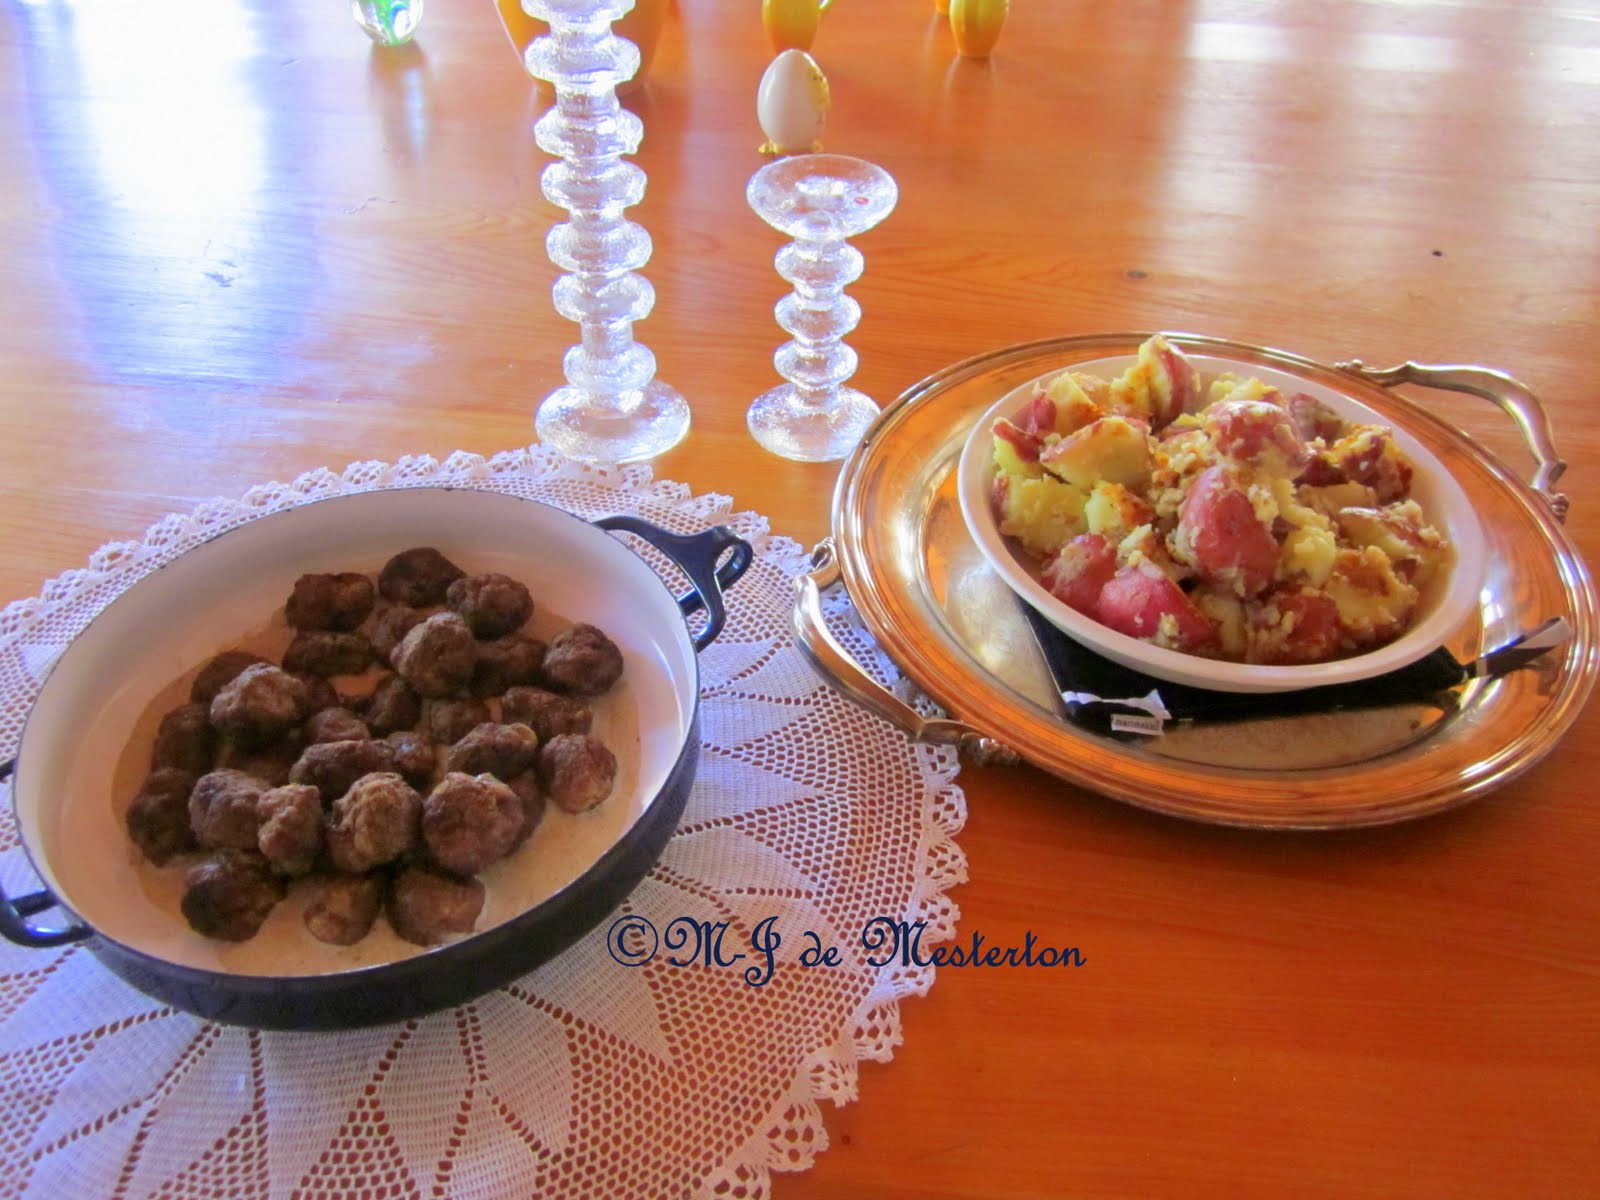 meatballs little  perhaps to with a whole how milk Serve  potatoes from new Swedish butter and make